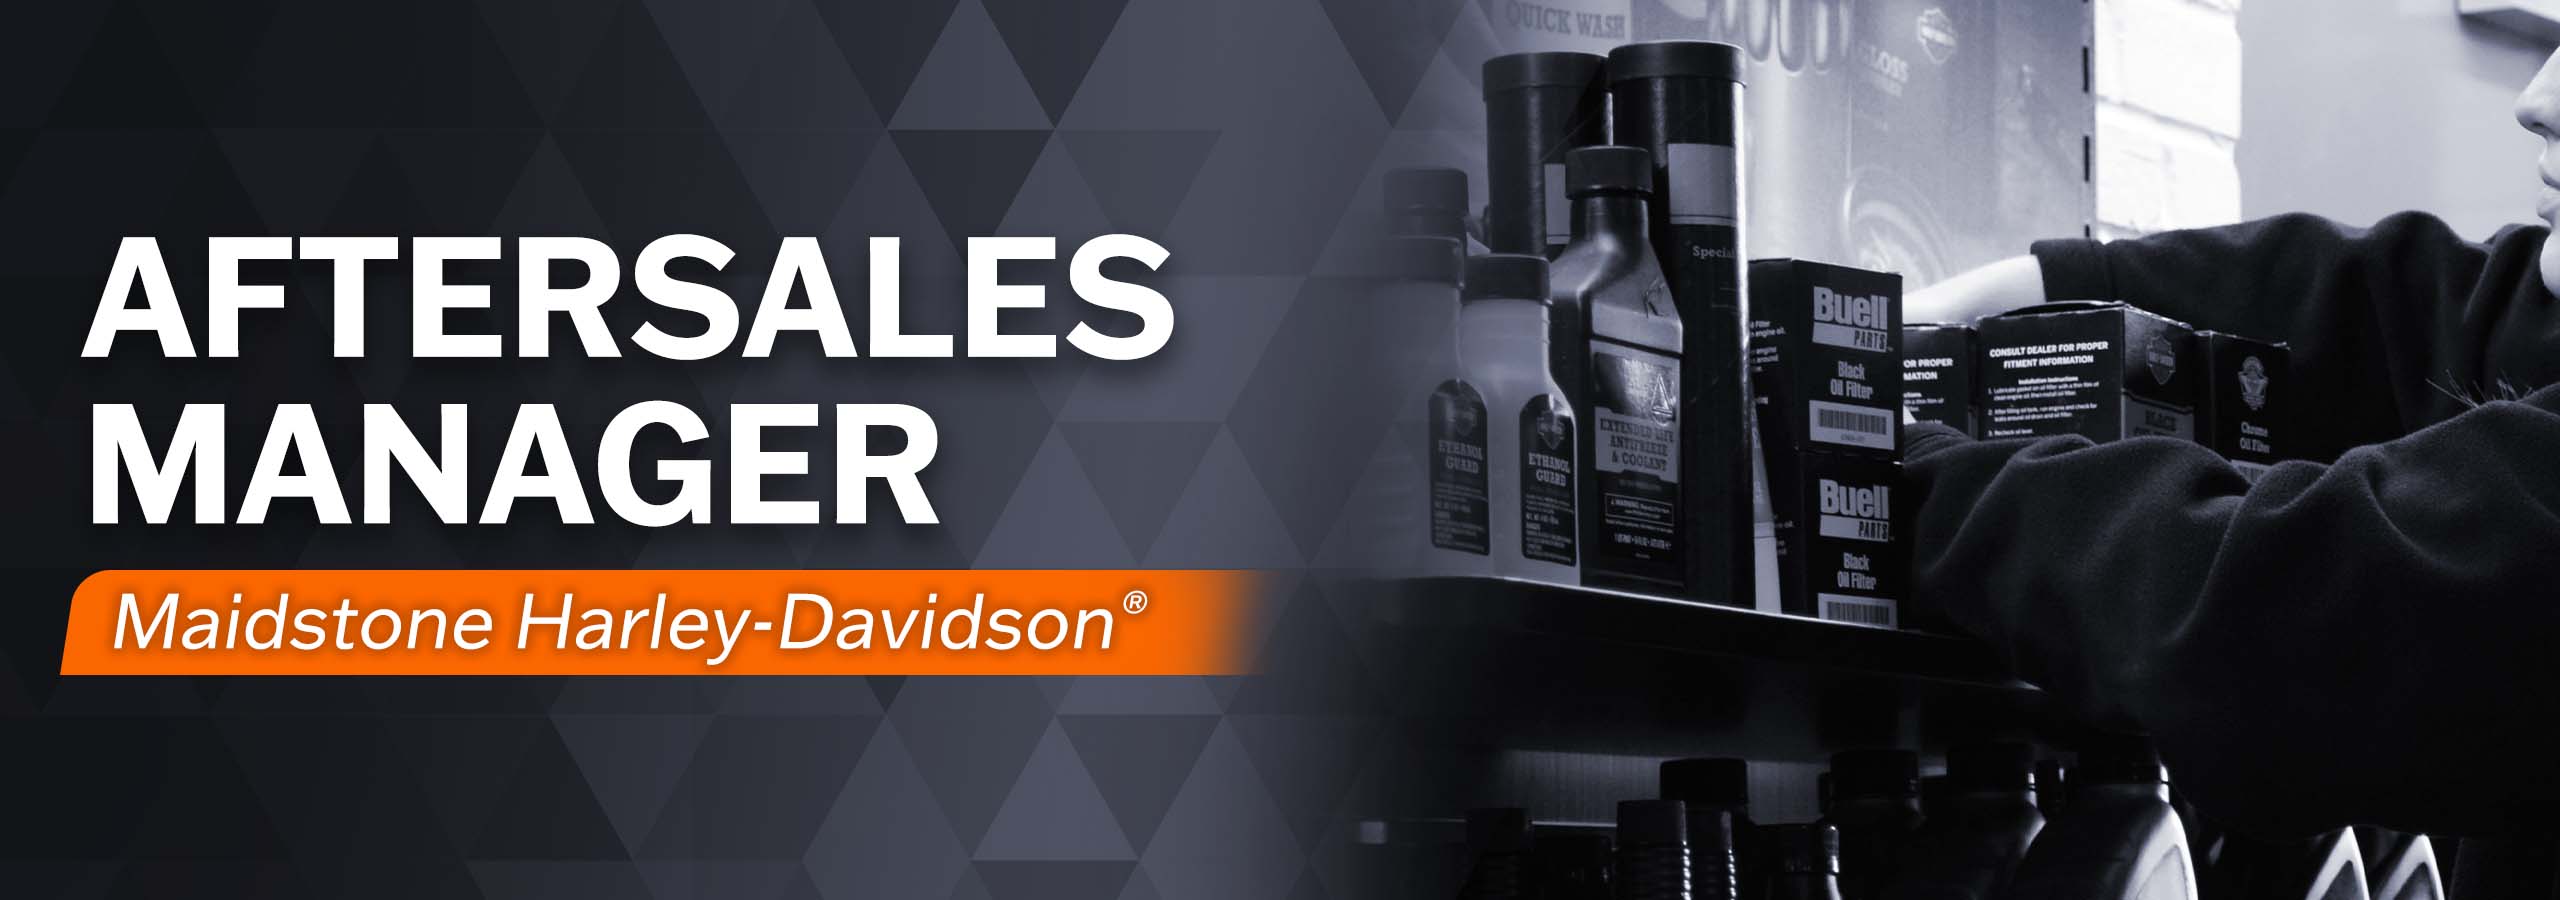 Aftersales Manager at Maidstone Harley-Davidson